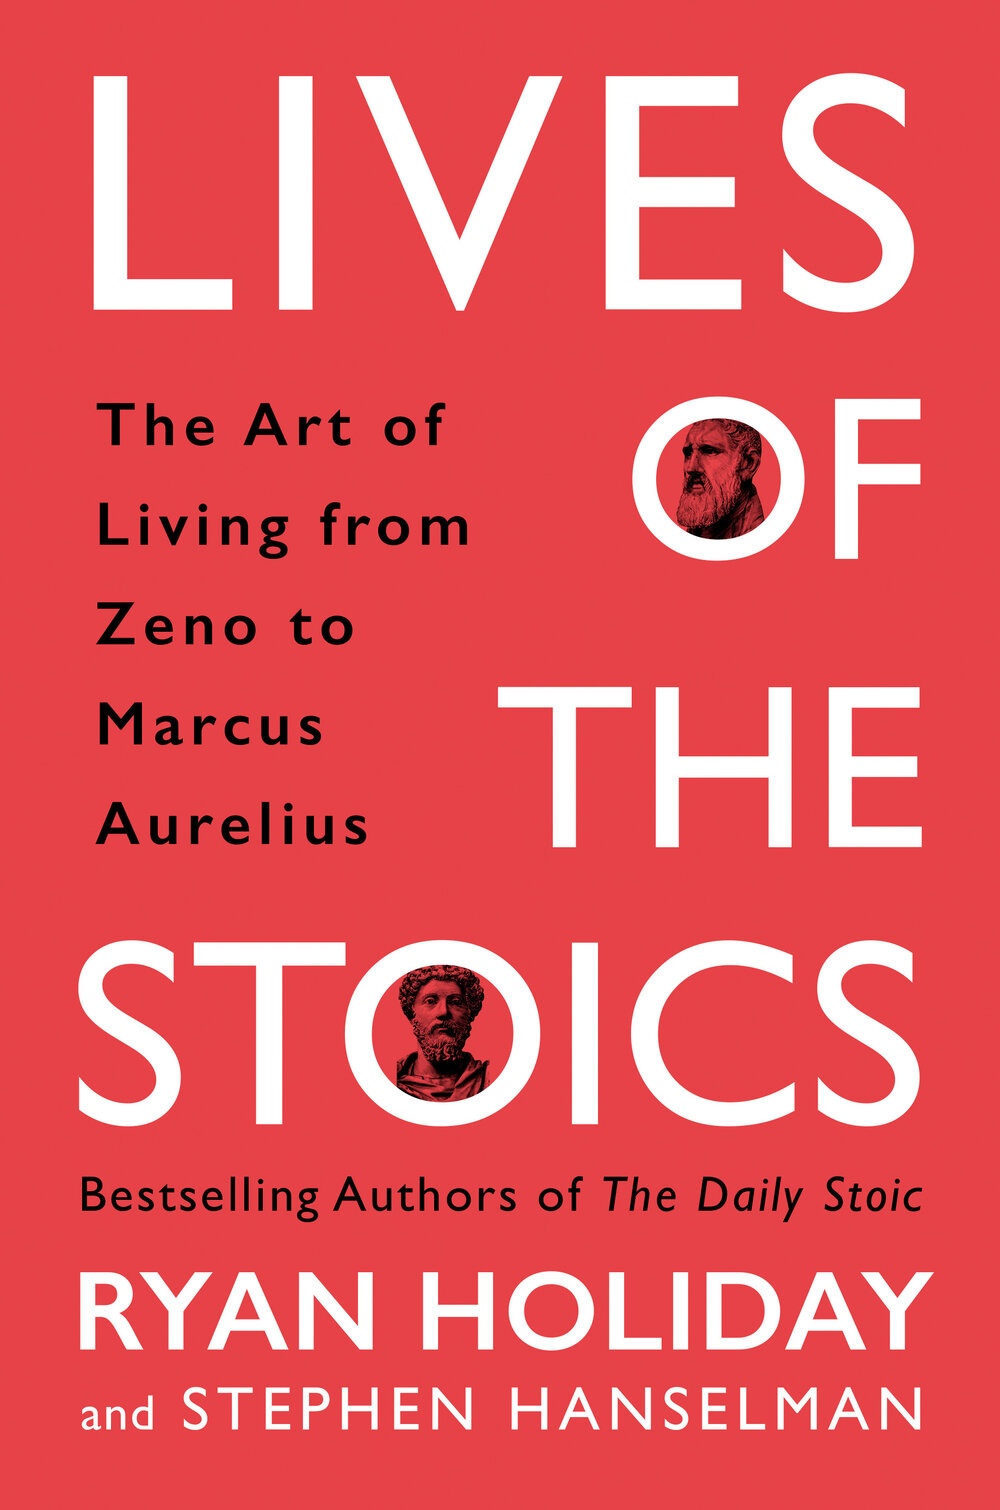 Lives of the Stoics: The Art of Living from Zeno to Marcus Aurelius by Ryan Holiday and Stephen Hanselman